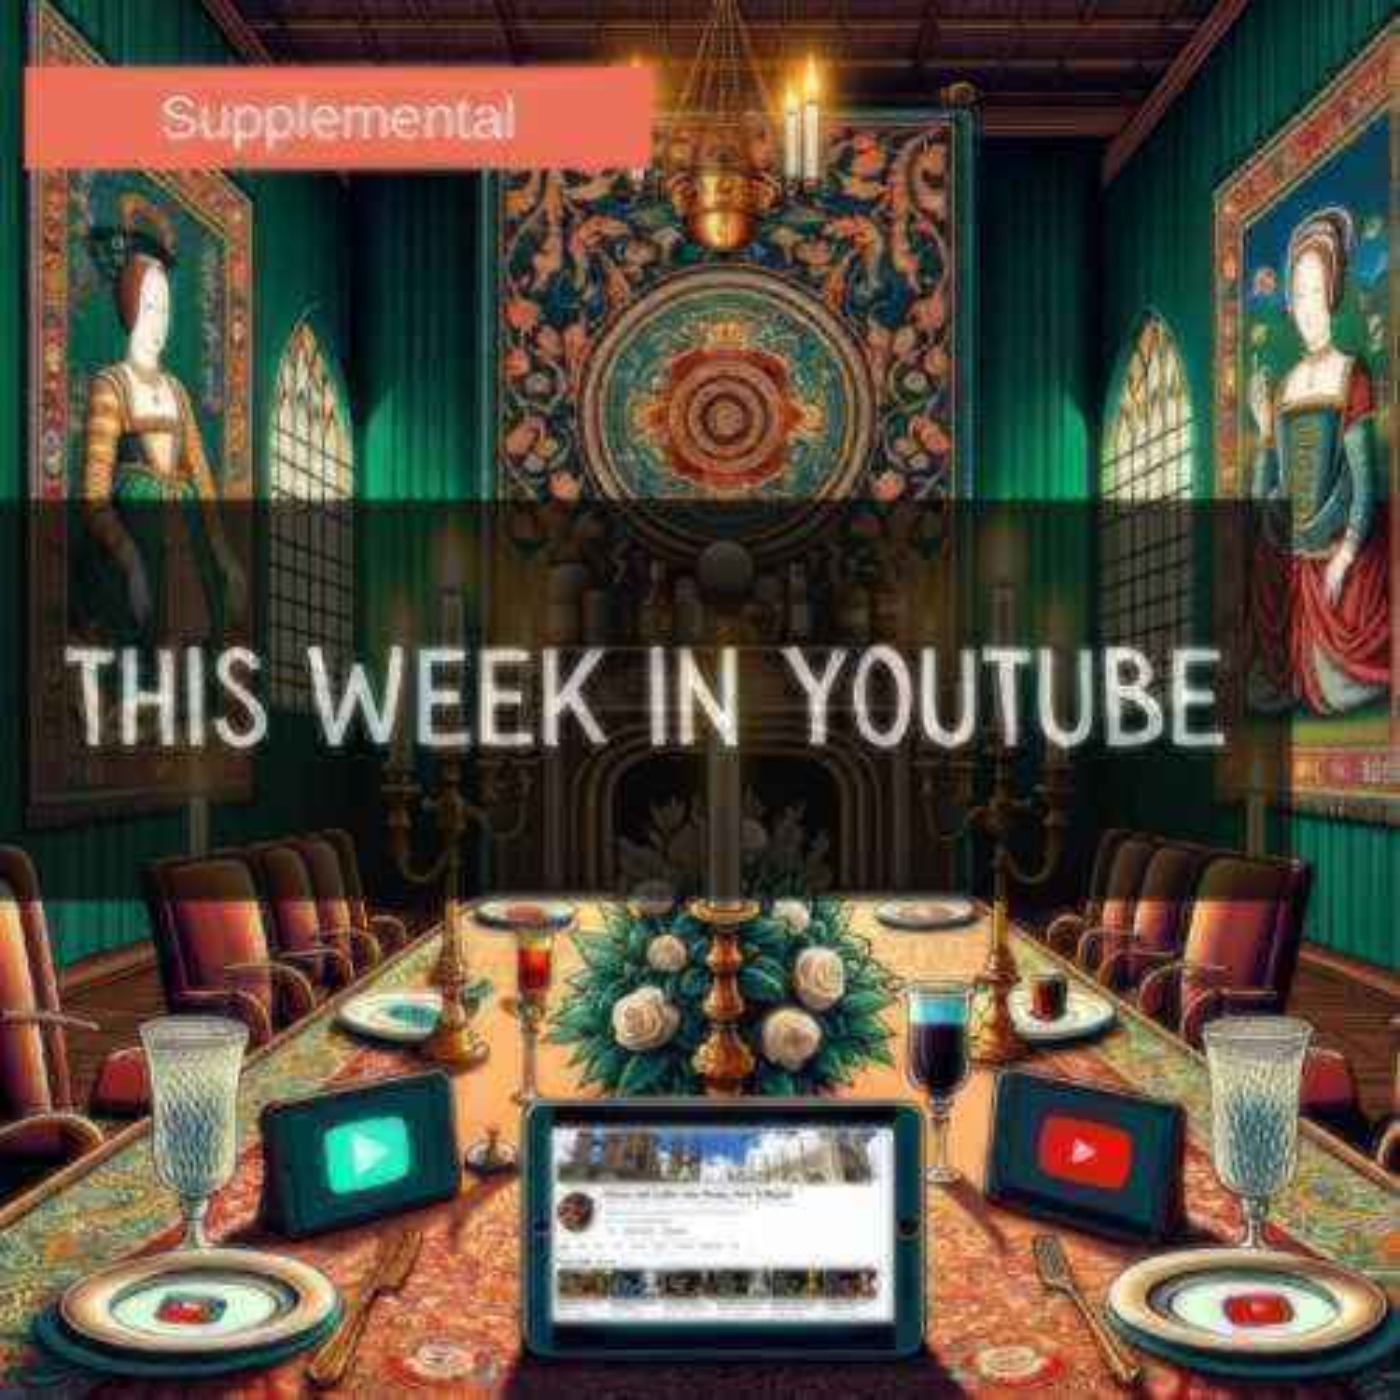 Supplemental: This Week in YouTube May 26